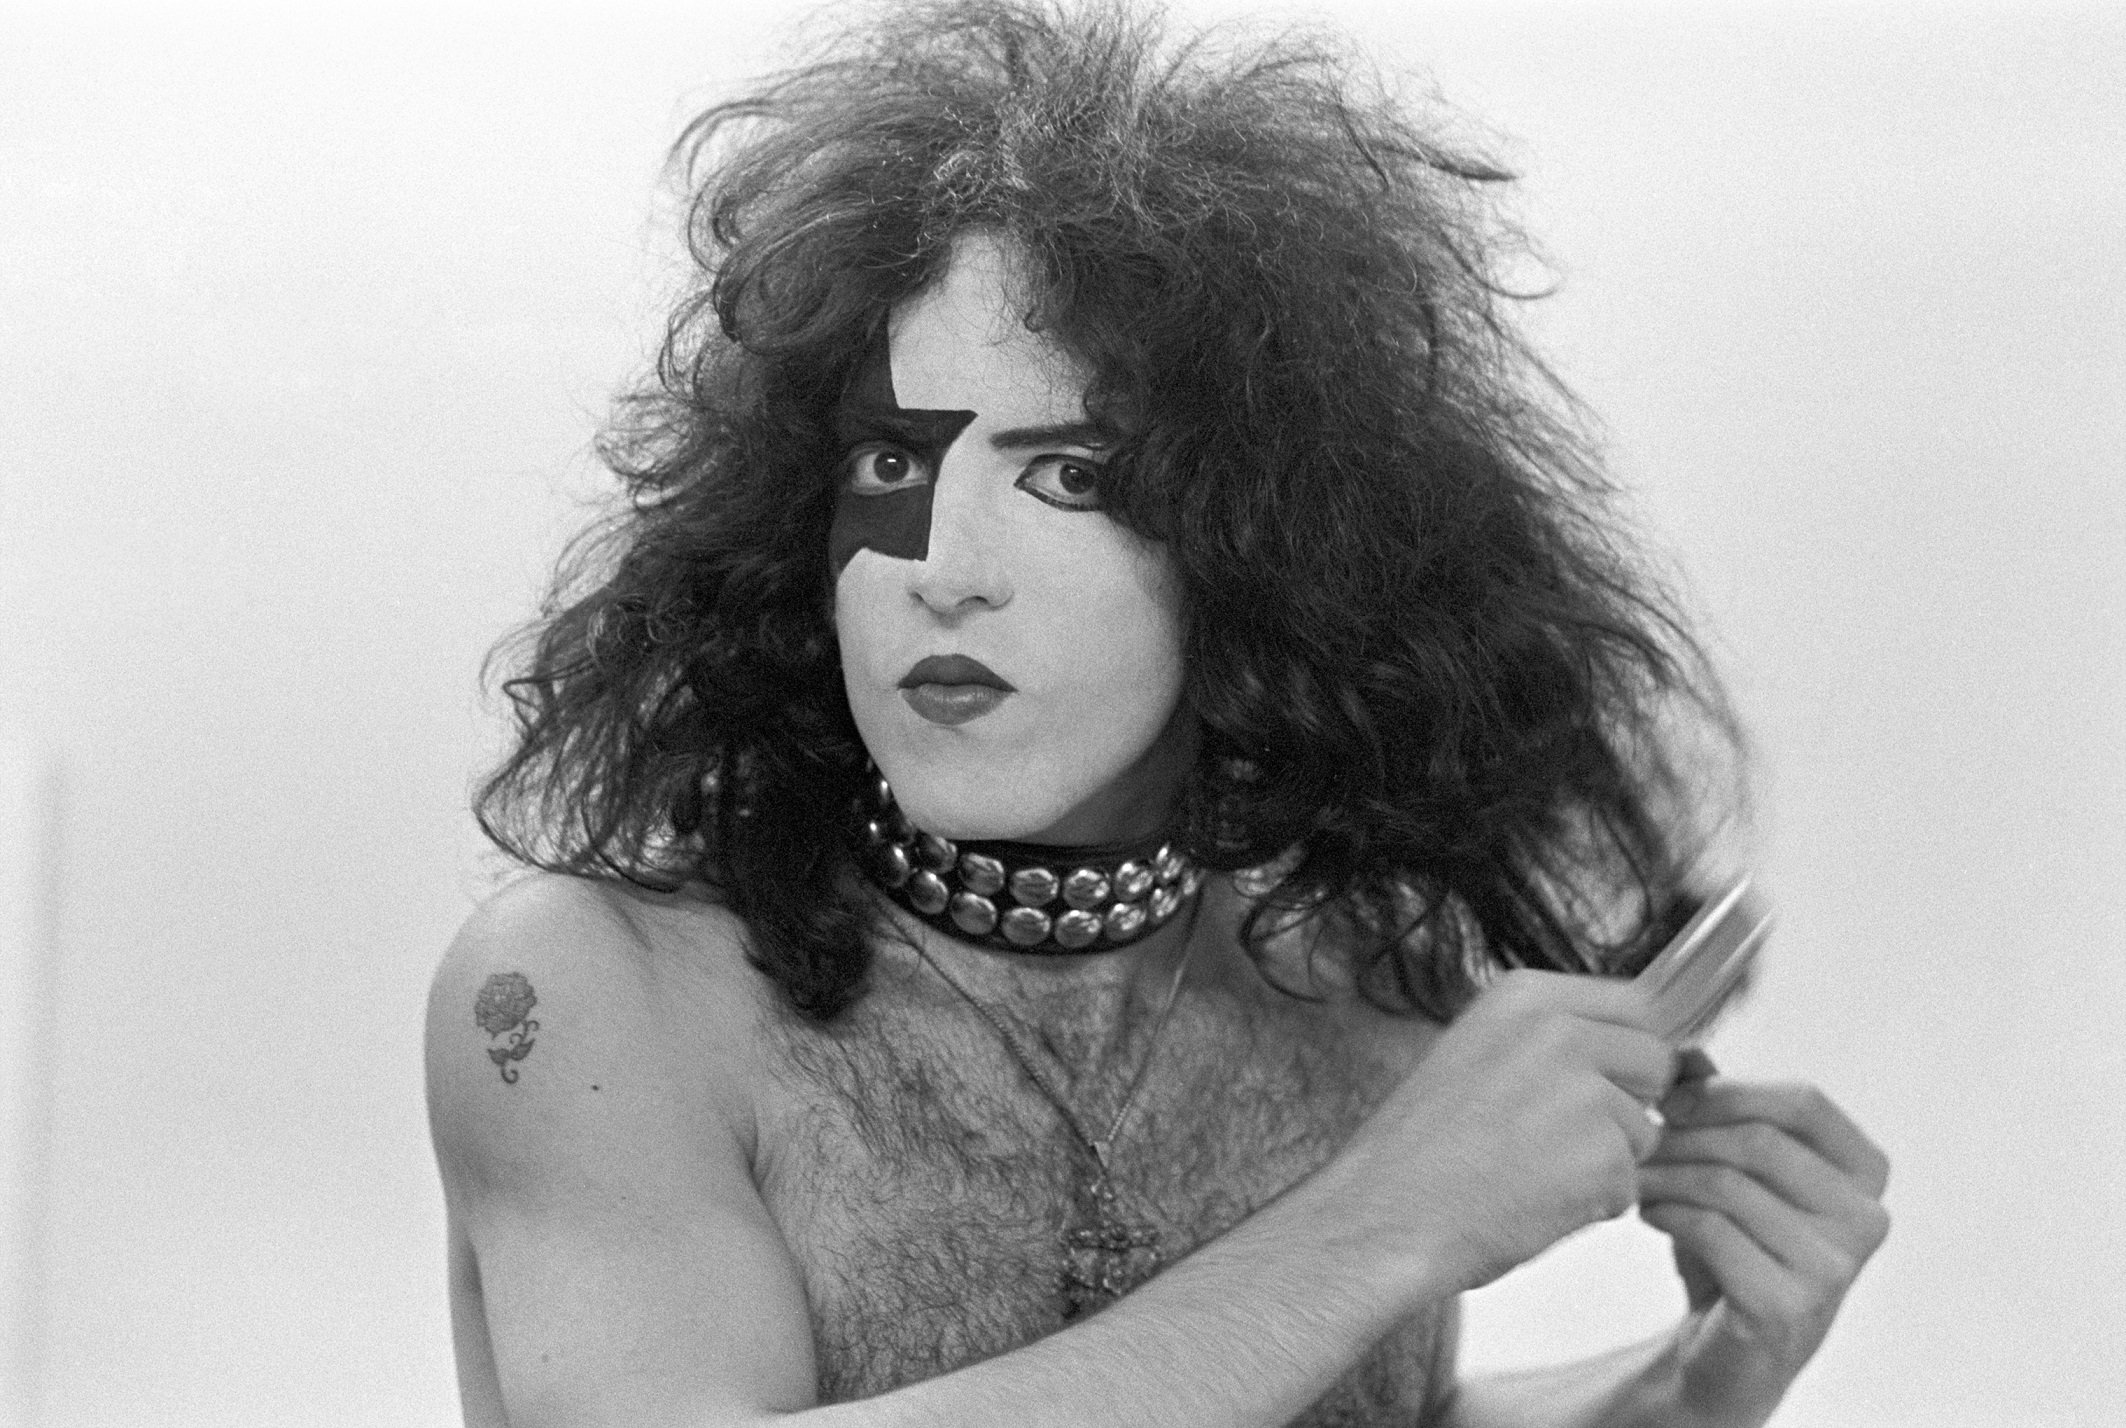 Paul Stanley of Kiss with a hair brush